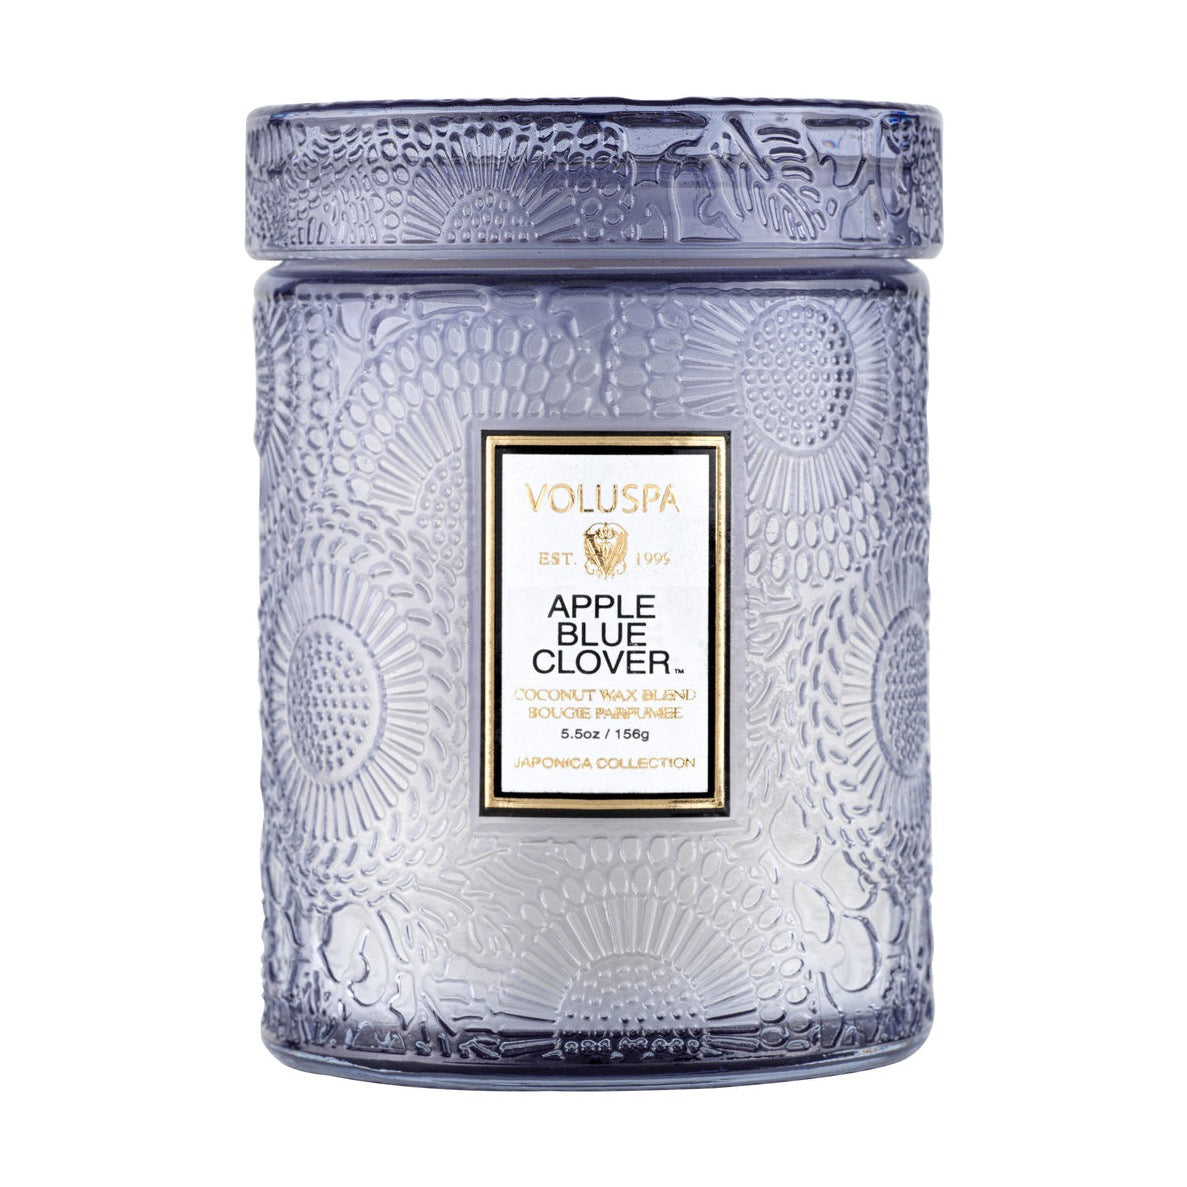 Apple Blue clover candle in purple glass embossed from top to bottom in the iconic Japonica wood block pattern.